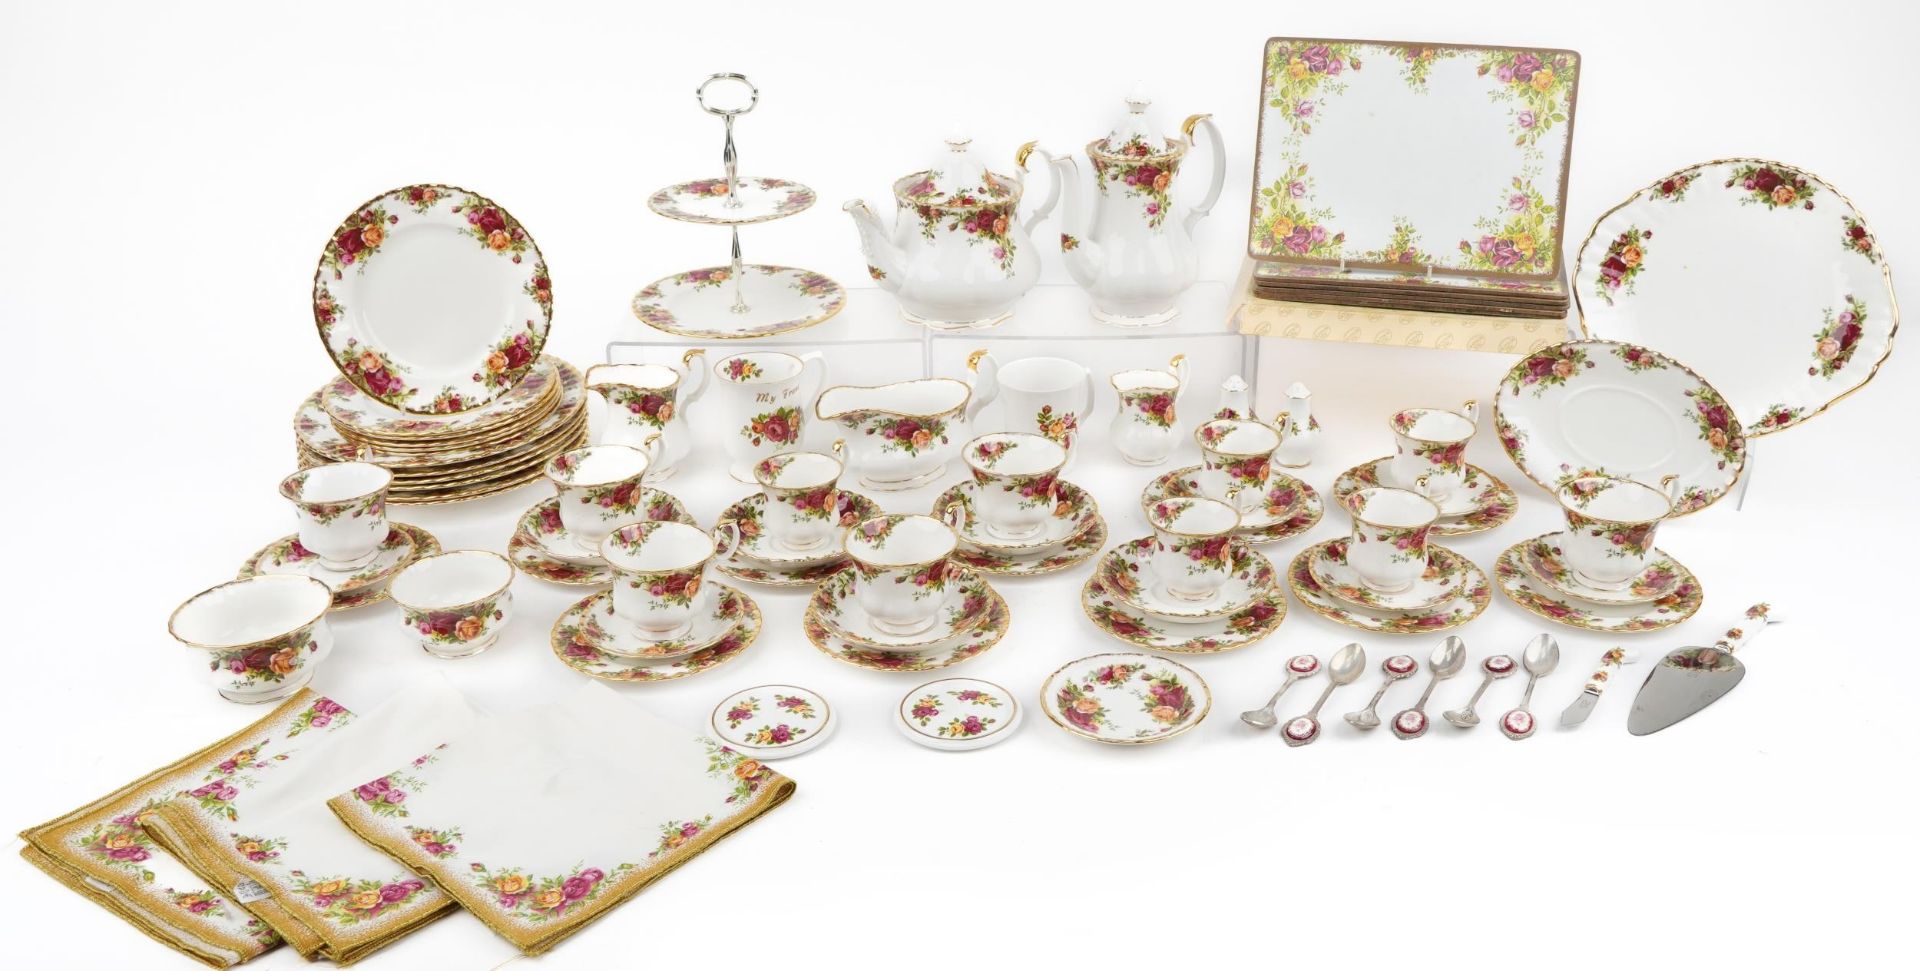 Royal Albert Old Country Roses dinner and teaware including teapot, coffee pot, cake stand and